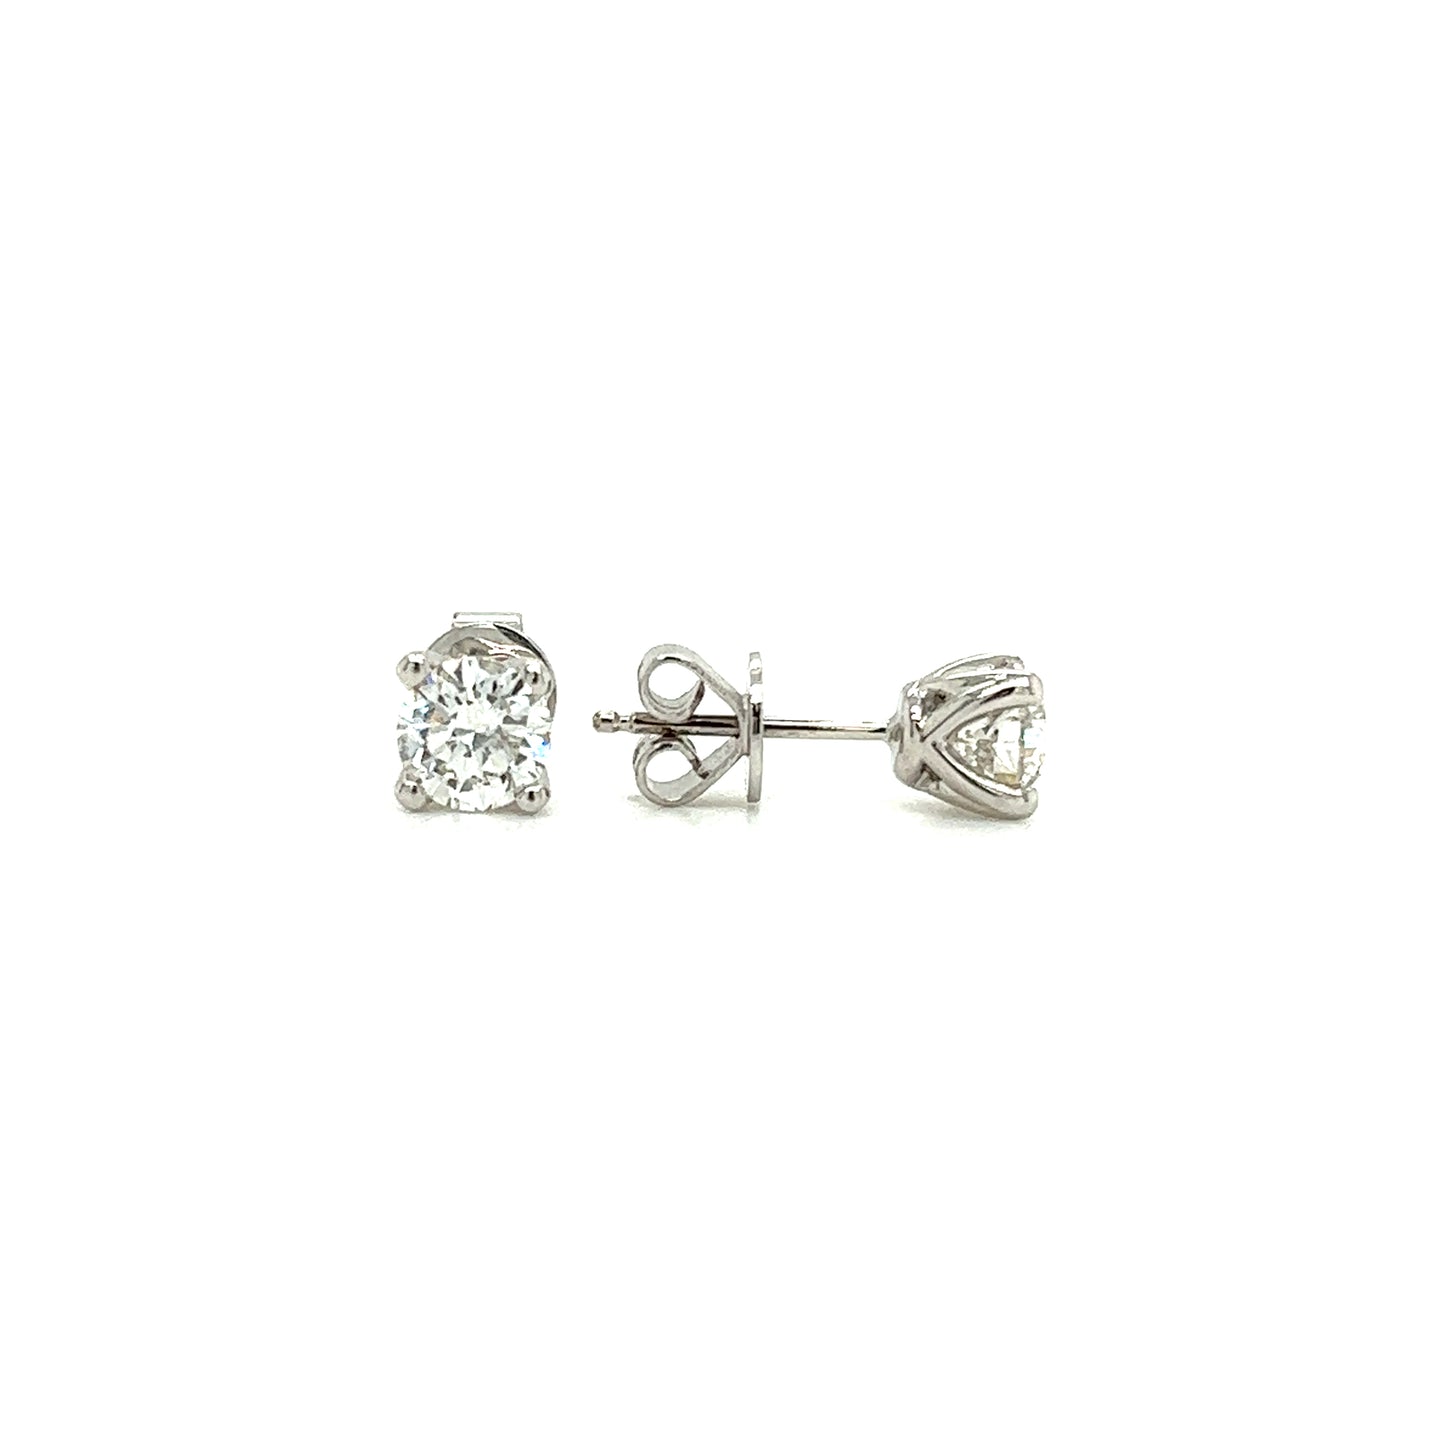 Diamond Stud Earrings with 1ctw of Diamonds in 14K White Gold Front and Side View